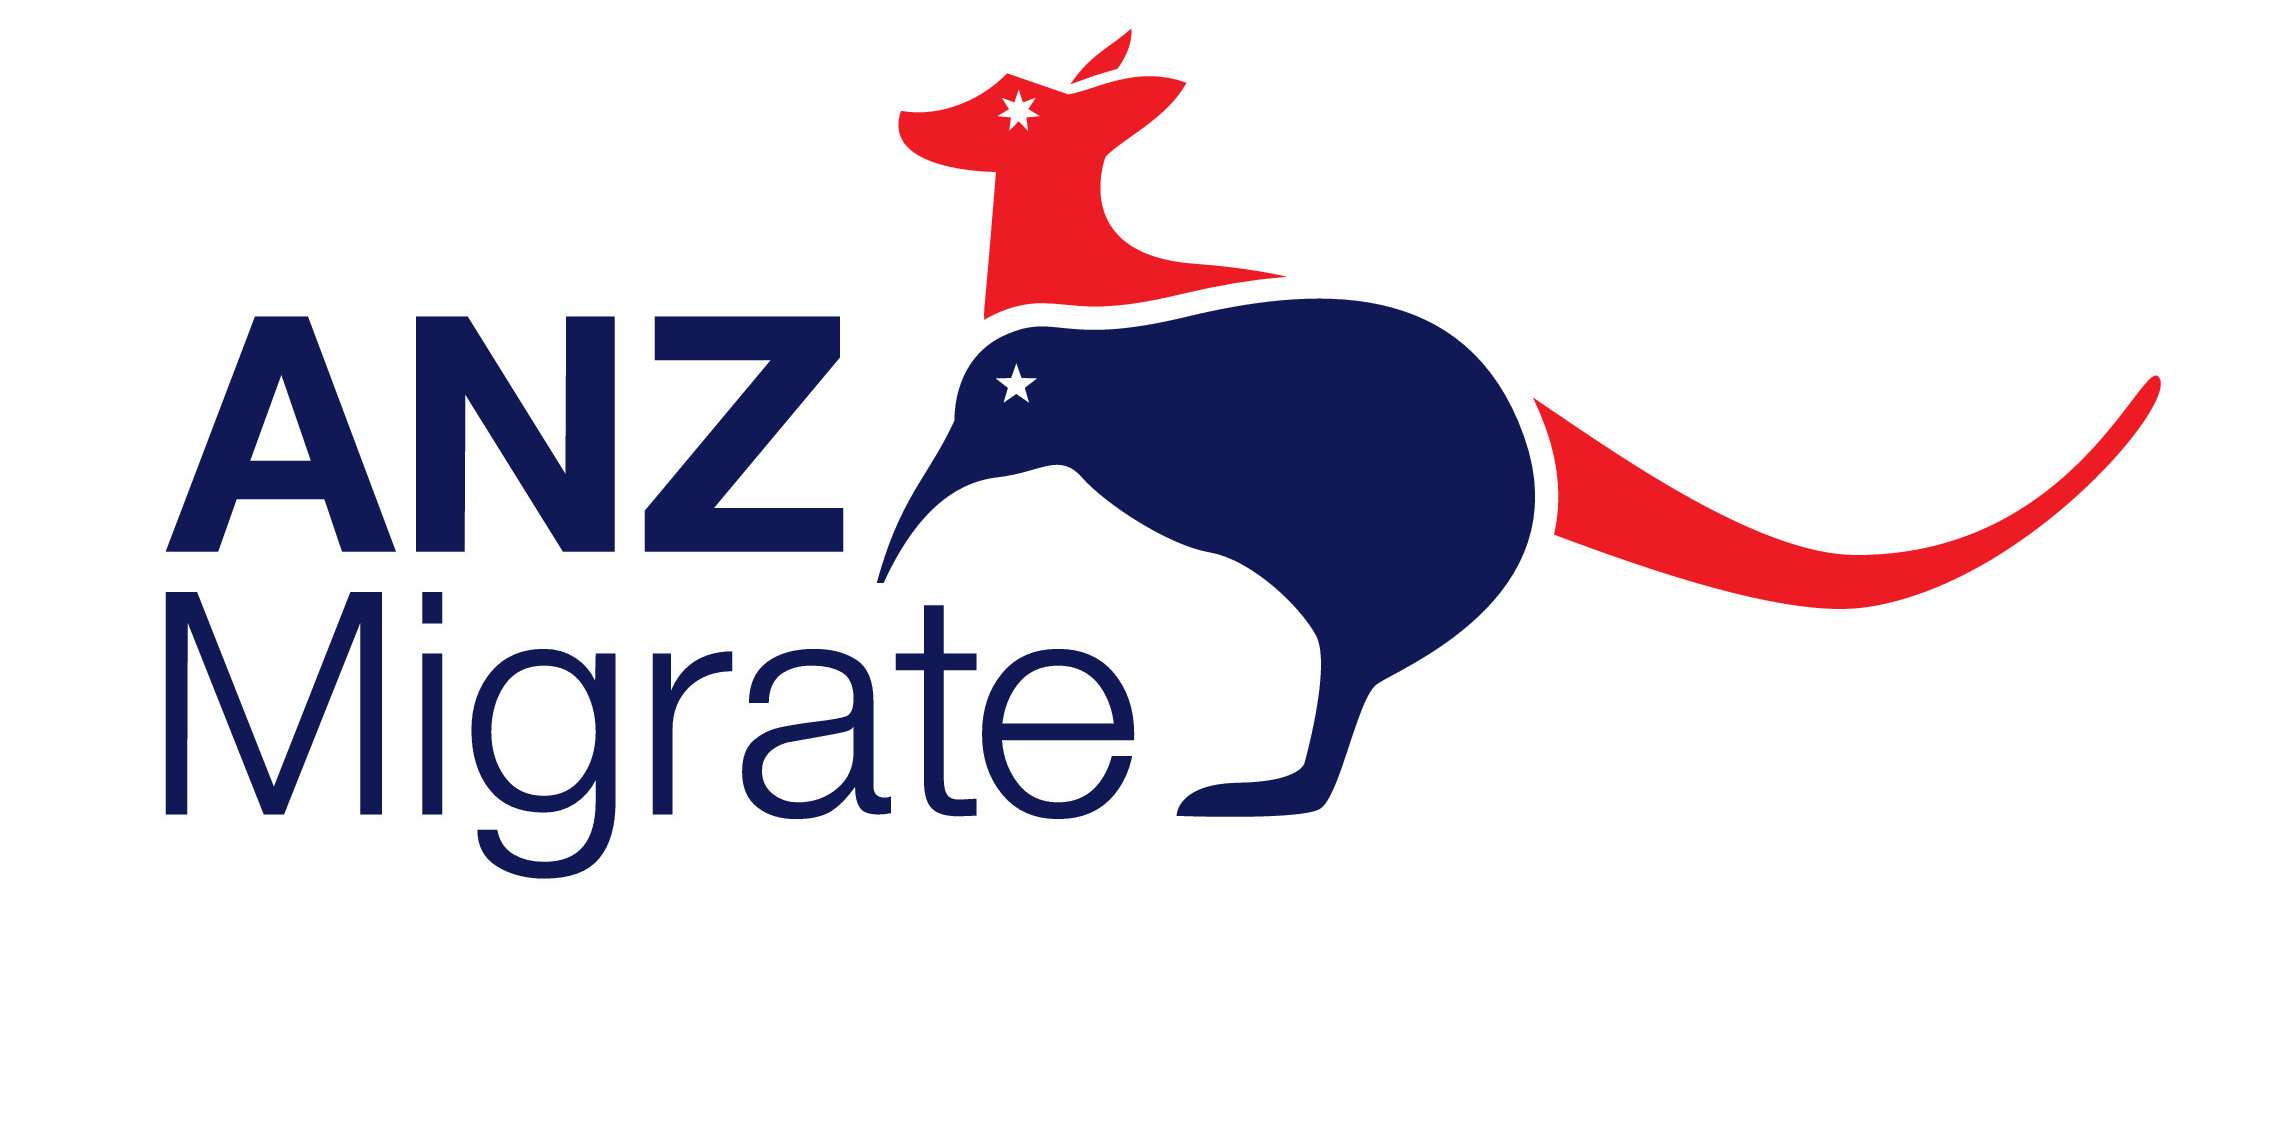 ANZMigrate